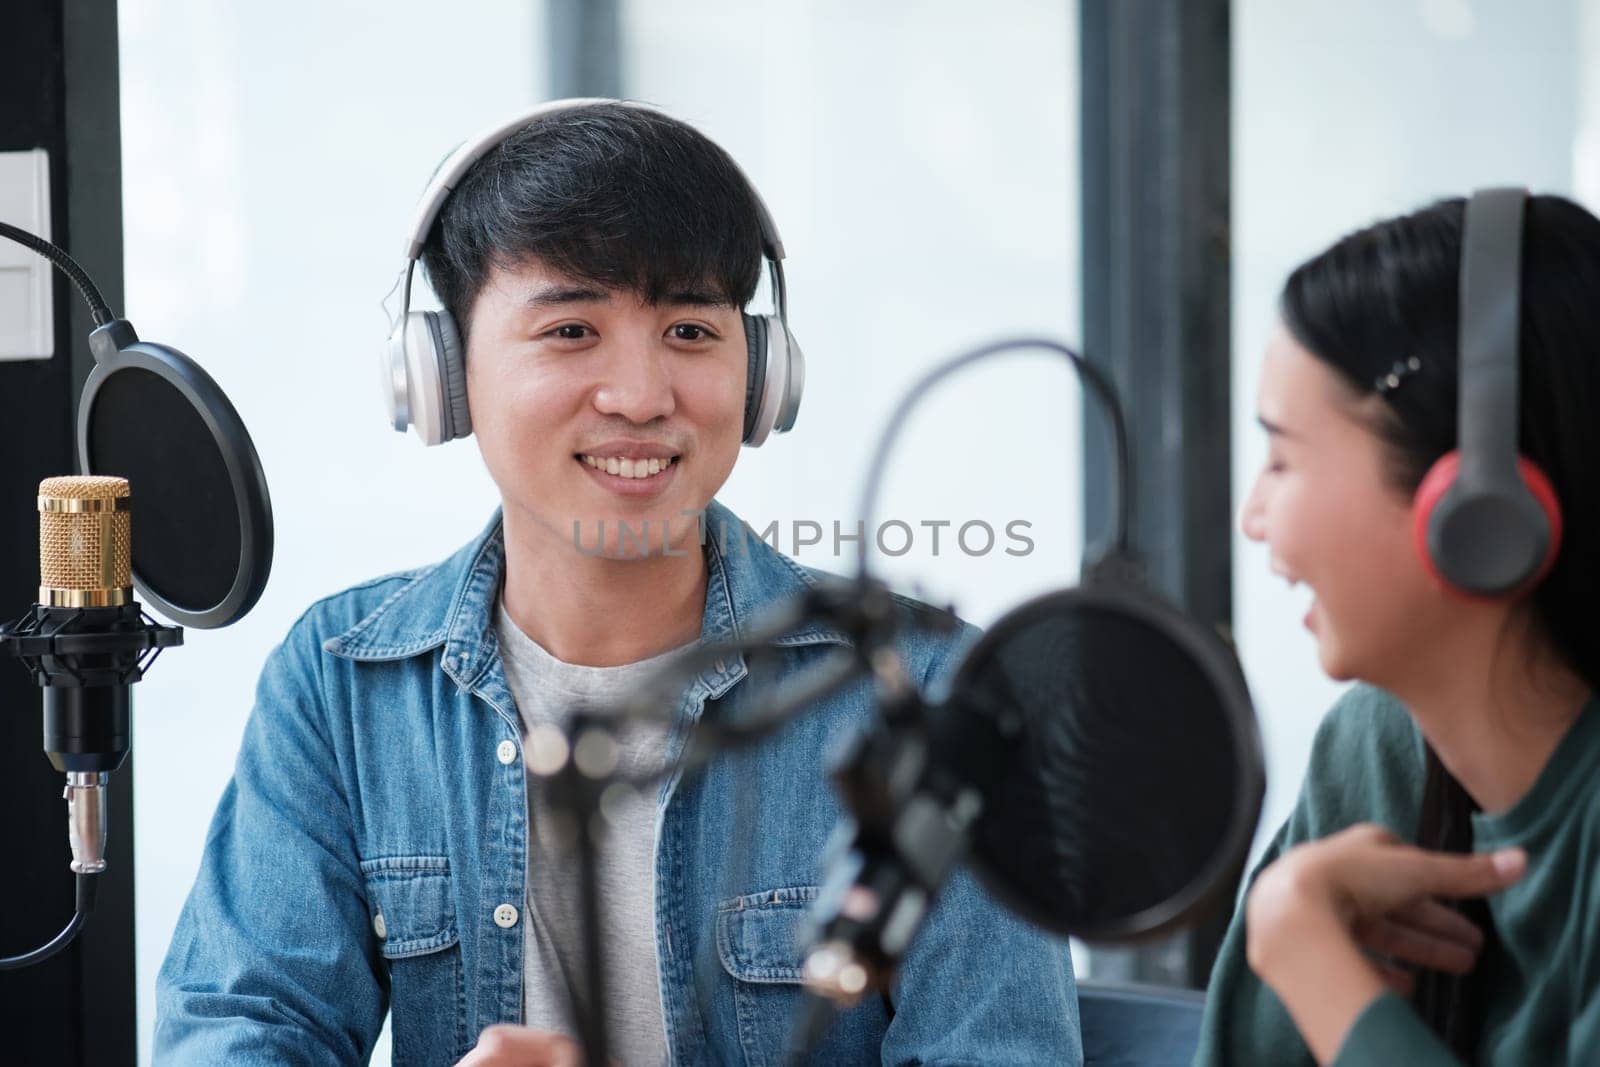 Two people are sitting in a studio with microphones and headphones on. One of them is smiling and the other is laughing. Scene is lighthearted and fun